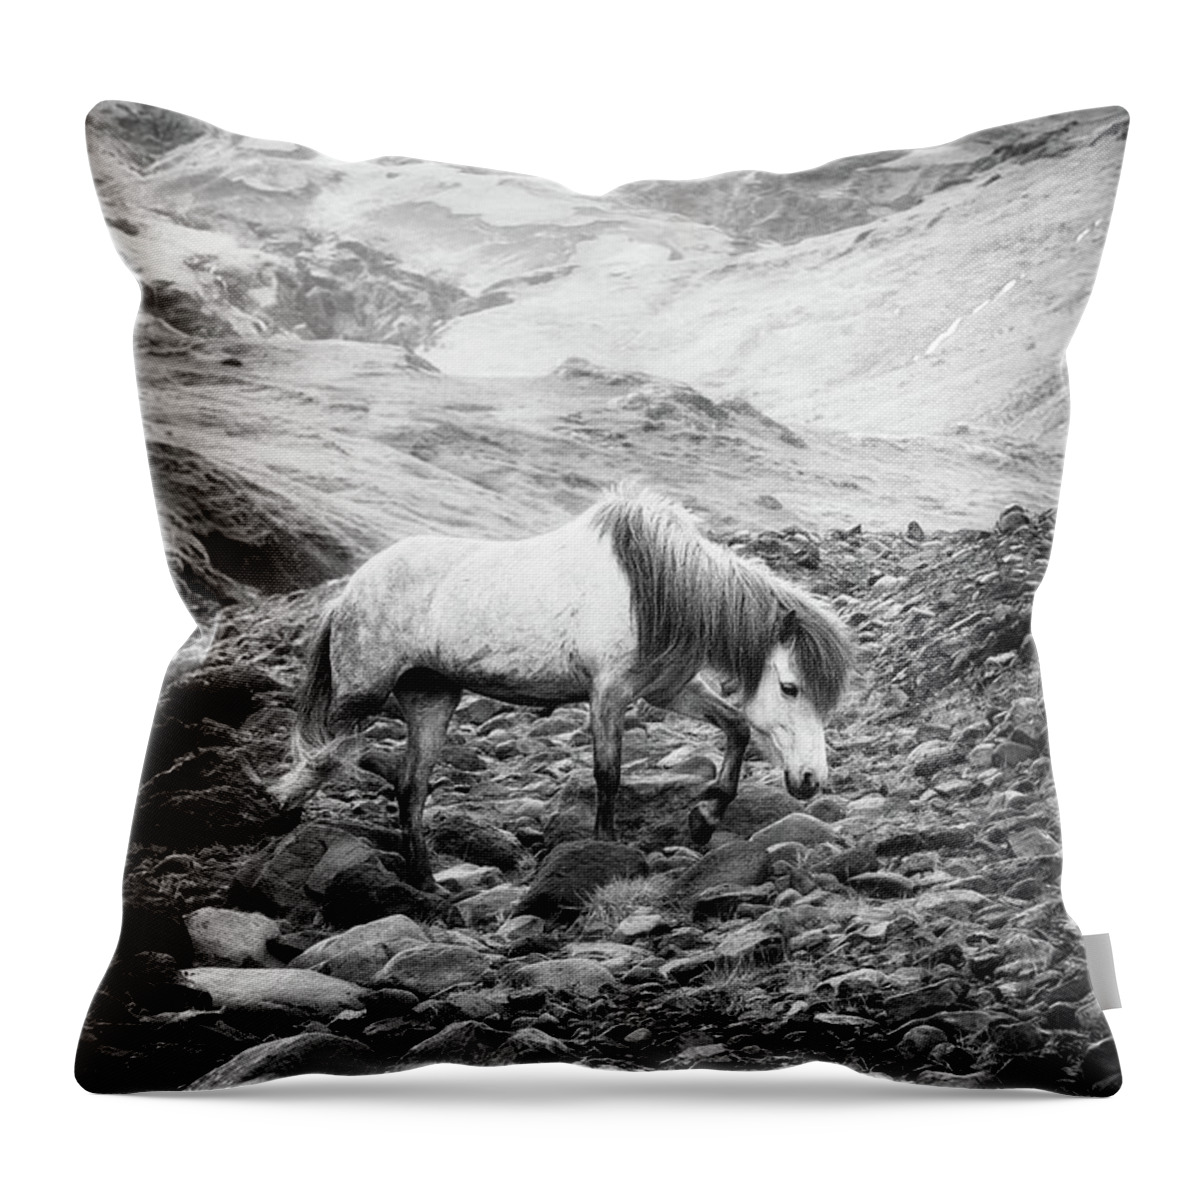 Photographs Throw Pillow featuring the photograph The Journey II - Horse Art by Lisa Saint